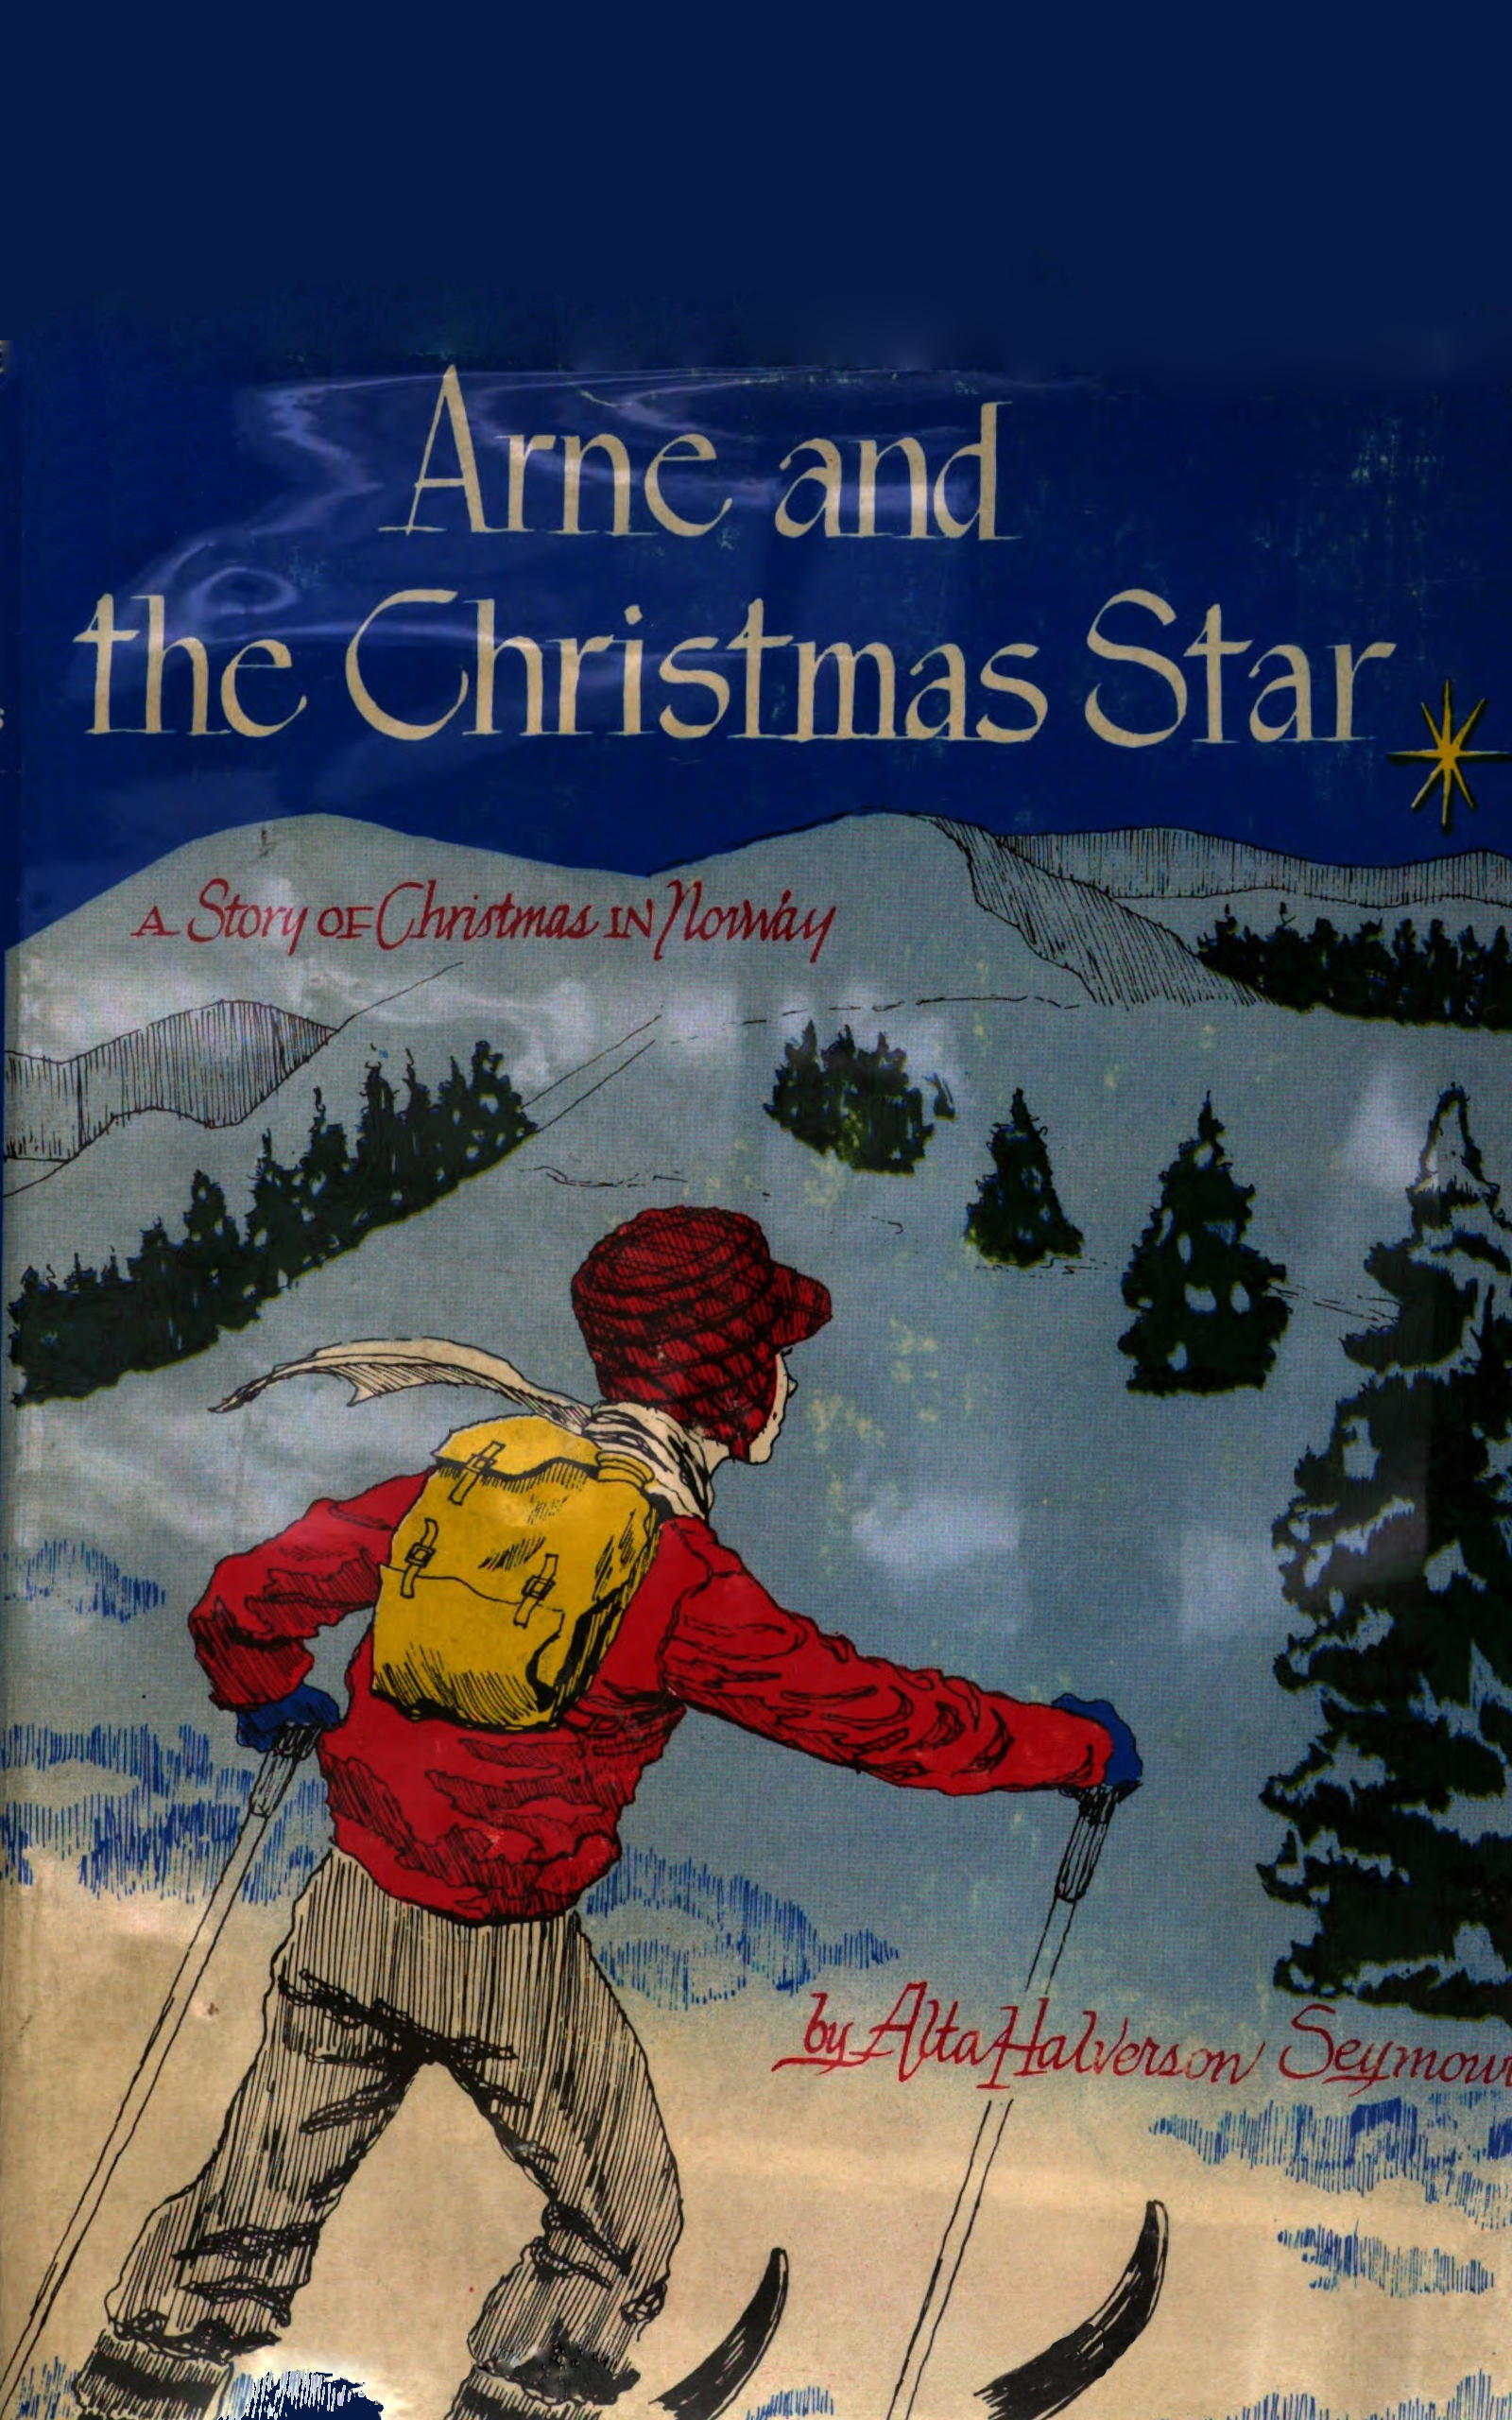 Arne and the Christmas star: A story of Norway